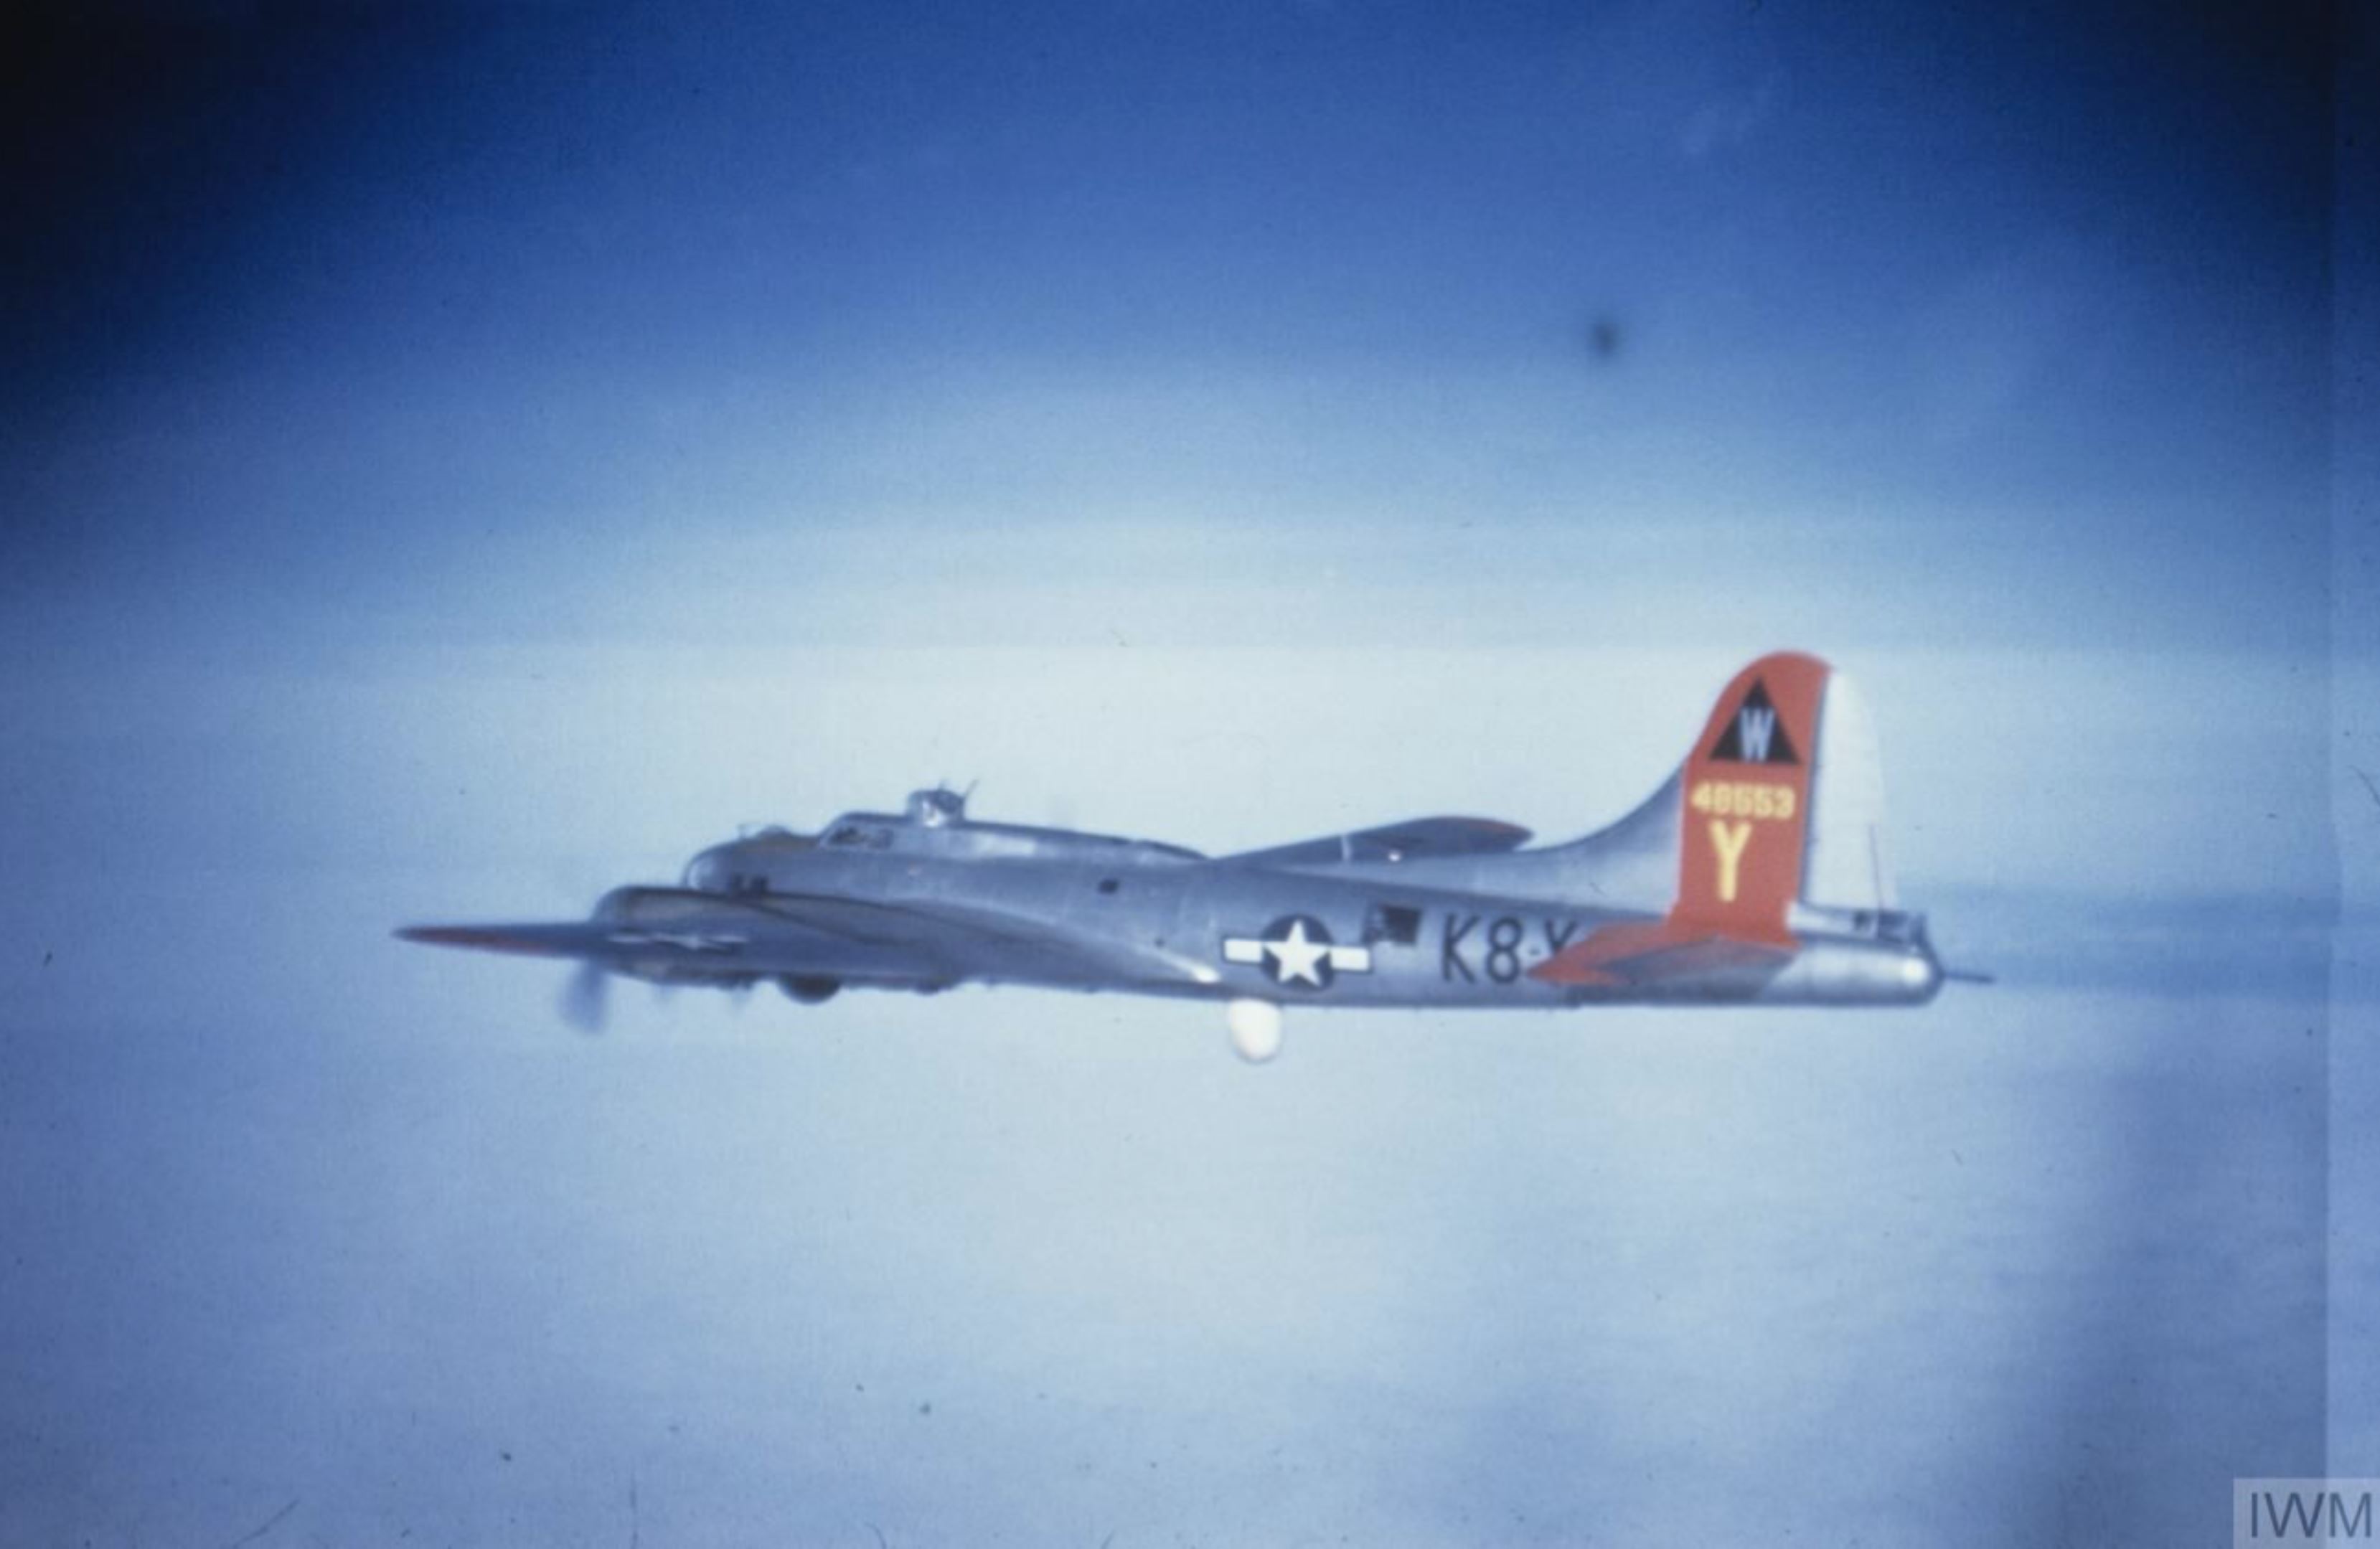 44 8553 B 17G Fortress 8AF 398BG602BS K8Y was a Mickey Ship in flight FRE6507